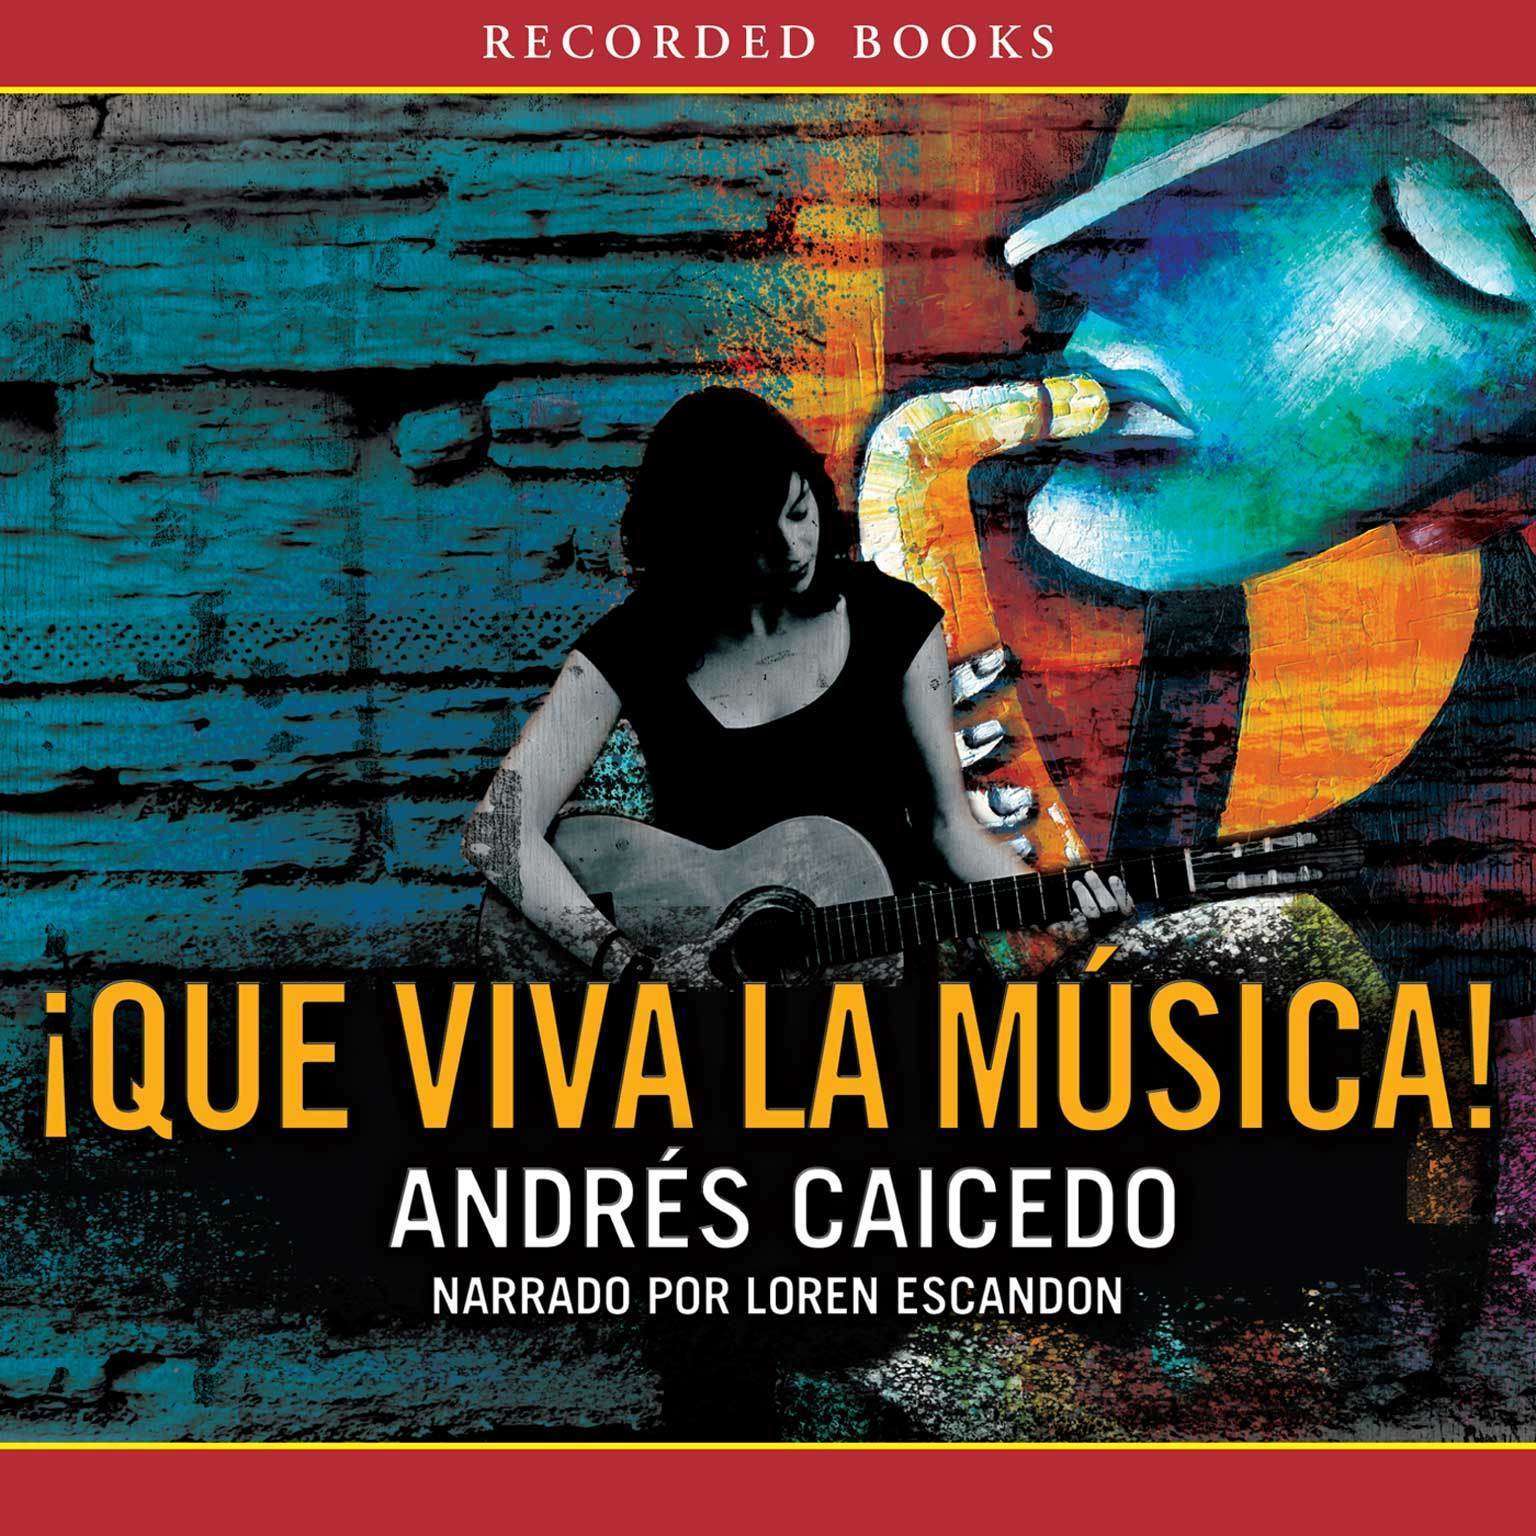 Que viva la musical (Long Live the Musical) Audiobook, by Andres Caicedo